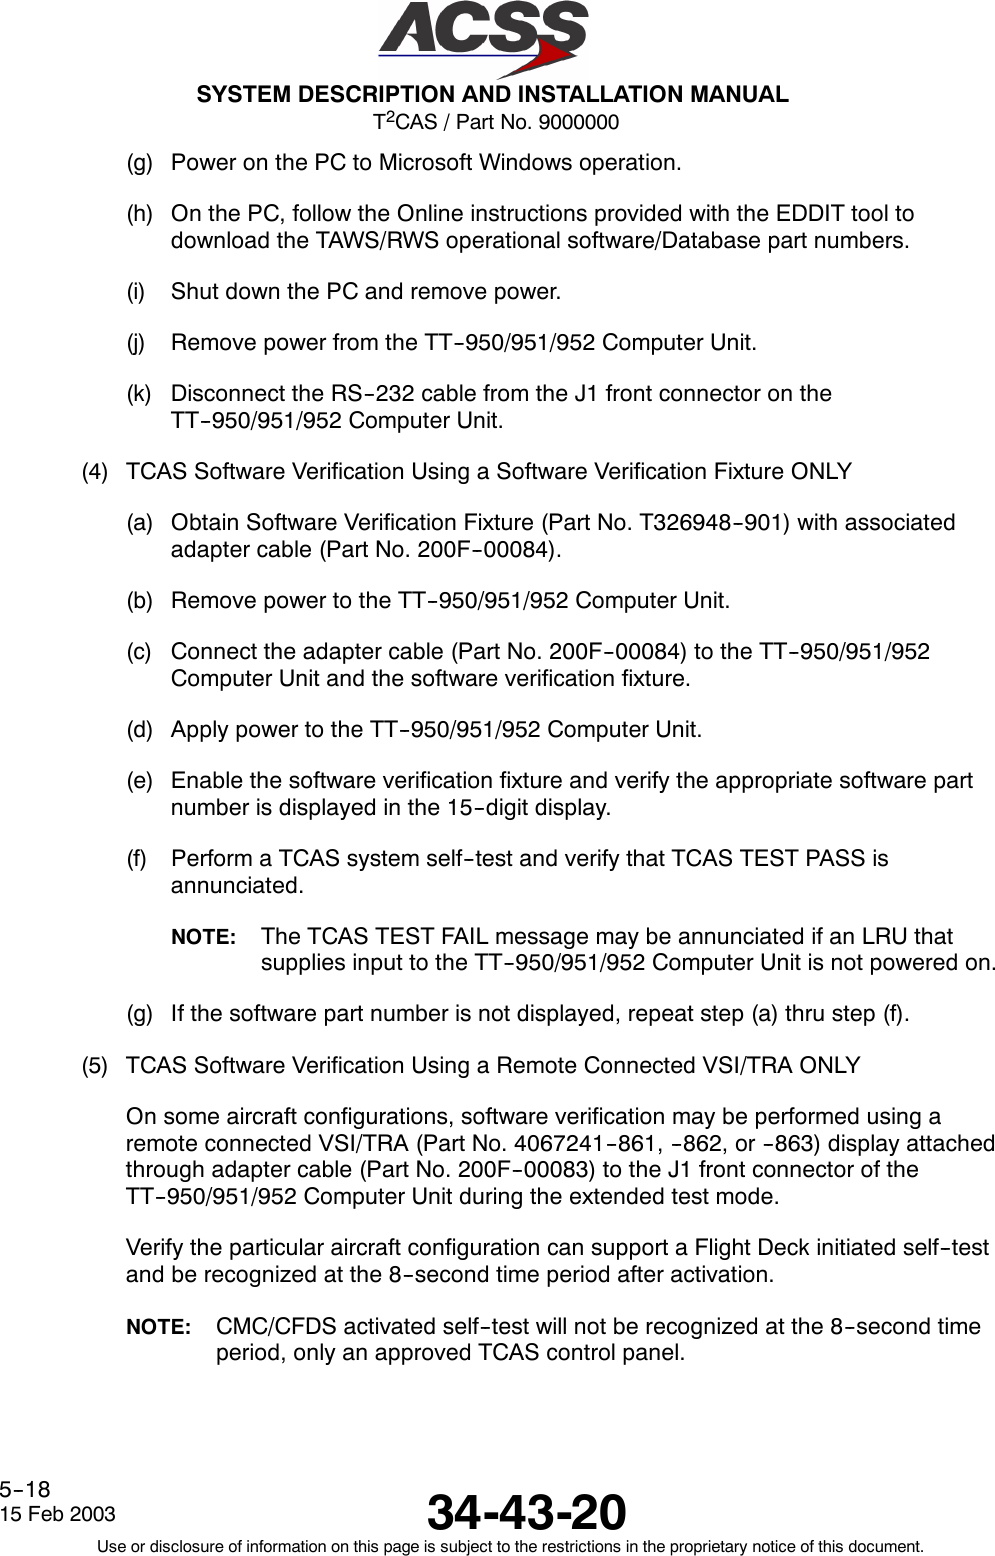 T2CAS / Part No. 9000000SYSTEM DESCRIPTION AND INSTALLATION MANUAL34-43-2015 Feb 2003Use or disclosure of information on this page is subject to the restrictions in the proprietary notice of this document.5--18(g) Power on the PC to Microsoft Windows operation.(h) On the PC, follow the Online instructions provided with the EDDIT tool todownload the TAWS/RWS operational software/Database part numbers.(i) Shut down the PC and remove power.(j) Remove power from the TT--950/951/952 Computer Unit.(k) Disconnect the RS--232 cable from the J1 front connector on theTT--950/951/952 Computer Unit.(4) TCAS Software Verification Using a Software Verification Fixture ONLY(a) Obtain Software Verification Fixture (Part No. T326948--901) with associatedadapter cable (Part No. 200F--00084).(b) Remove power to the TT--950/951/952 Computer Unit.(c) Connect the adapter cable (Part No. 200F--00084) to the TT--950/951/952Computer Unit and the software verification fixture.(d) Apply power to the TT--950/951/952 Computer Unit.(e) Enable the software verification fixture and verify the appropriate software partnumber is displayed in the 15--digit display.(f) Perform a TCAS system self--test and verify that TCAS TEST PASS isannunciated.NOTE: The TCAS TEST FAIL message may be annunciated if an LRU thatsupplies input to the TT--950/951/952 Computer Unit is not powered on.(g) If the software part number is not displayed, repeat step (a) thru step (f).(5) TCAS Software Verification Using a Remote Connected VSI/TRA ONLYOn some aircraft configurations, software verification may be performed using aremote connected VSI/TRA (Part No. 4067241--861, --862, or --863) display attachedthrough adapter cable (Part No. 200F--00083) to the J1 front connector of theTT--950/951/952 Computer Unit during the extended test mode.Verify the particular aircraft configuration can support a Flight Deck initiated self--testand be recognized at the 8--second time period after activation.NOTE: CMC/CFDS activated self--test will not be recognized at the 8--second timeperiod, only an approved TCAS control panel.